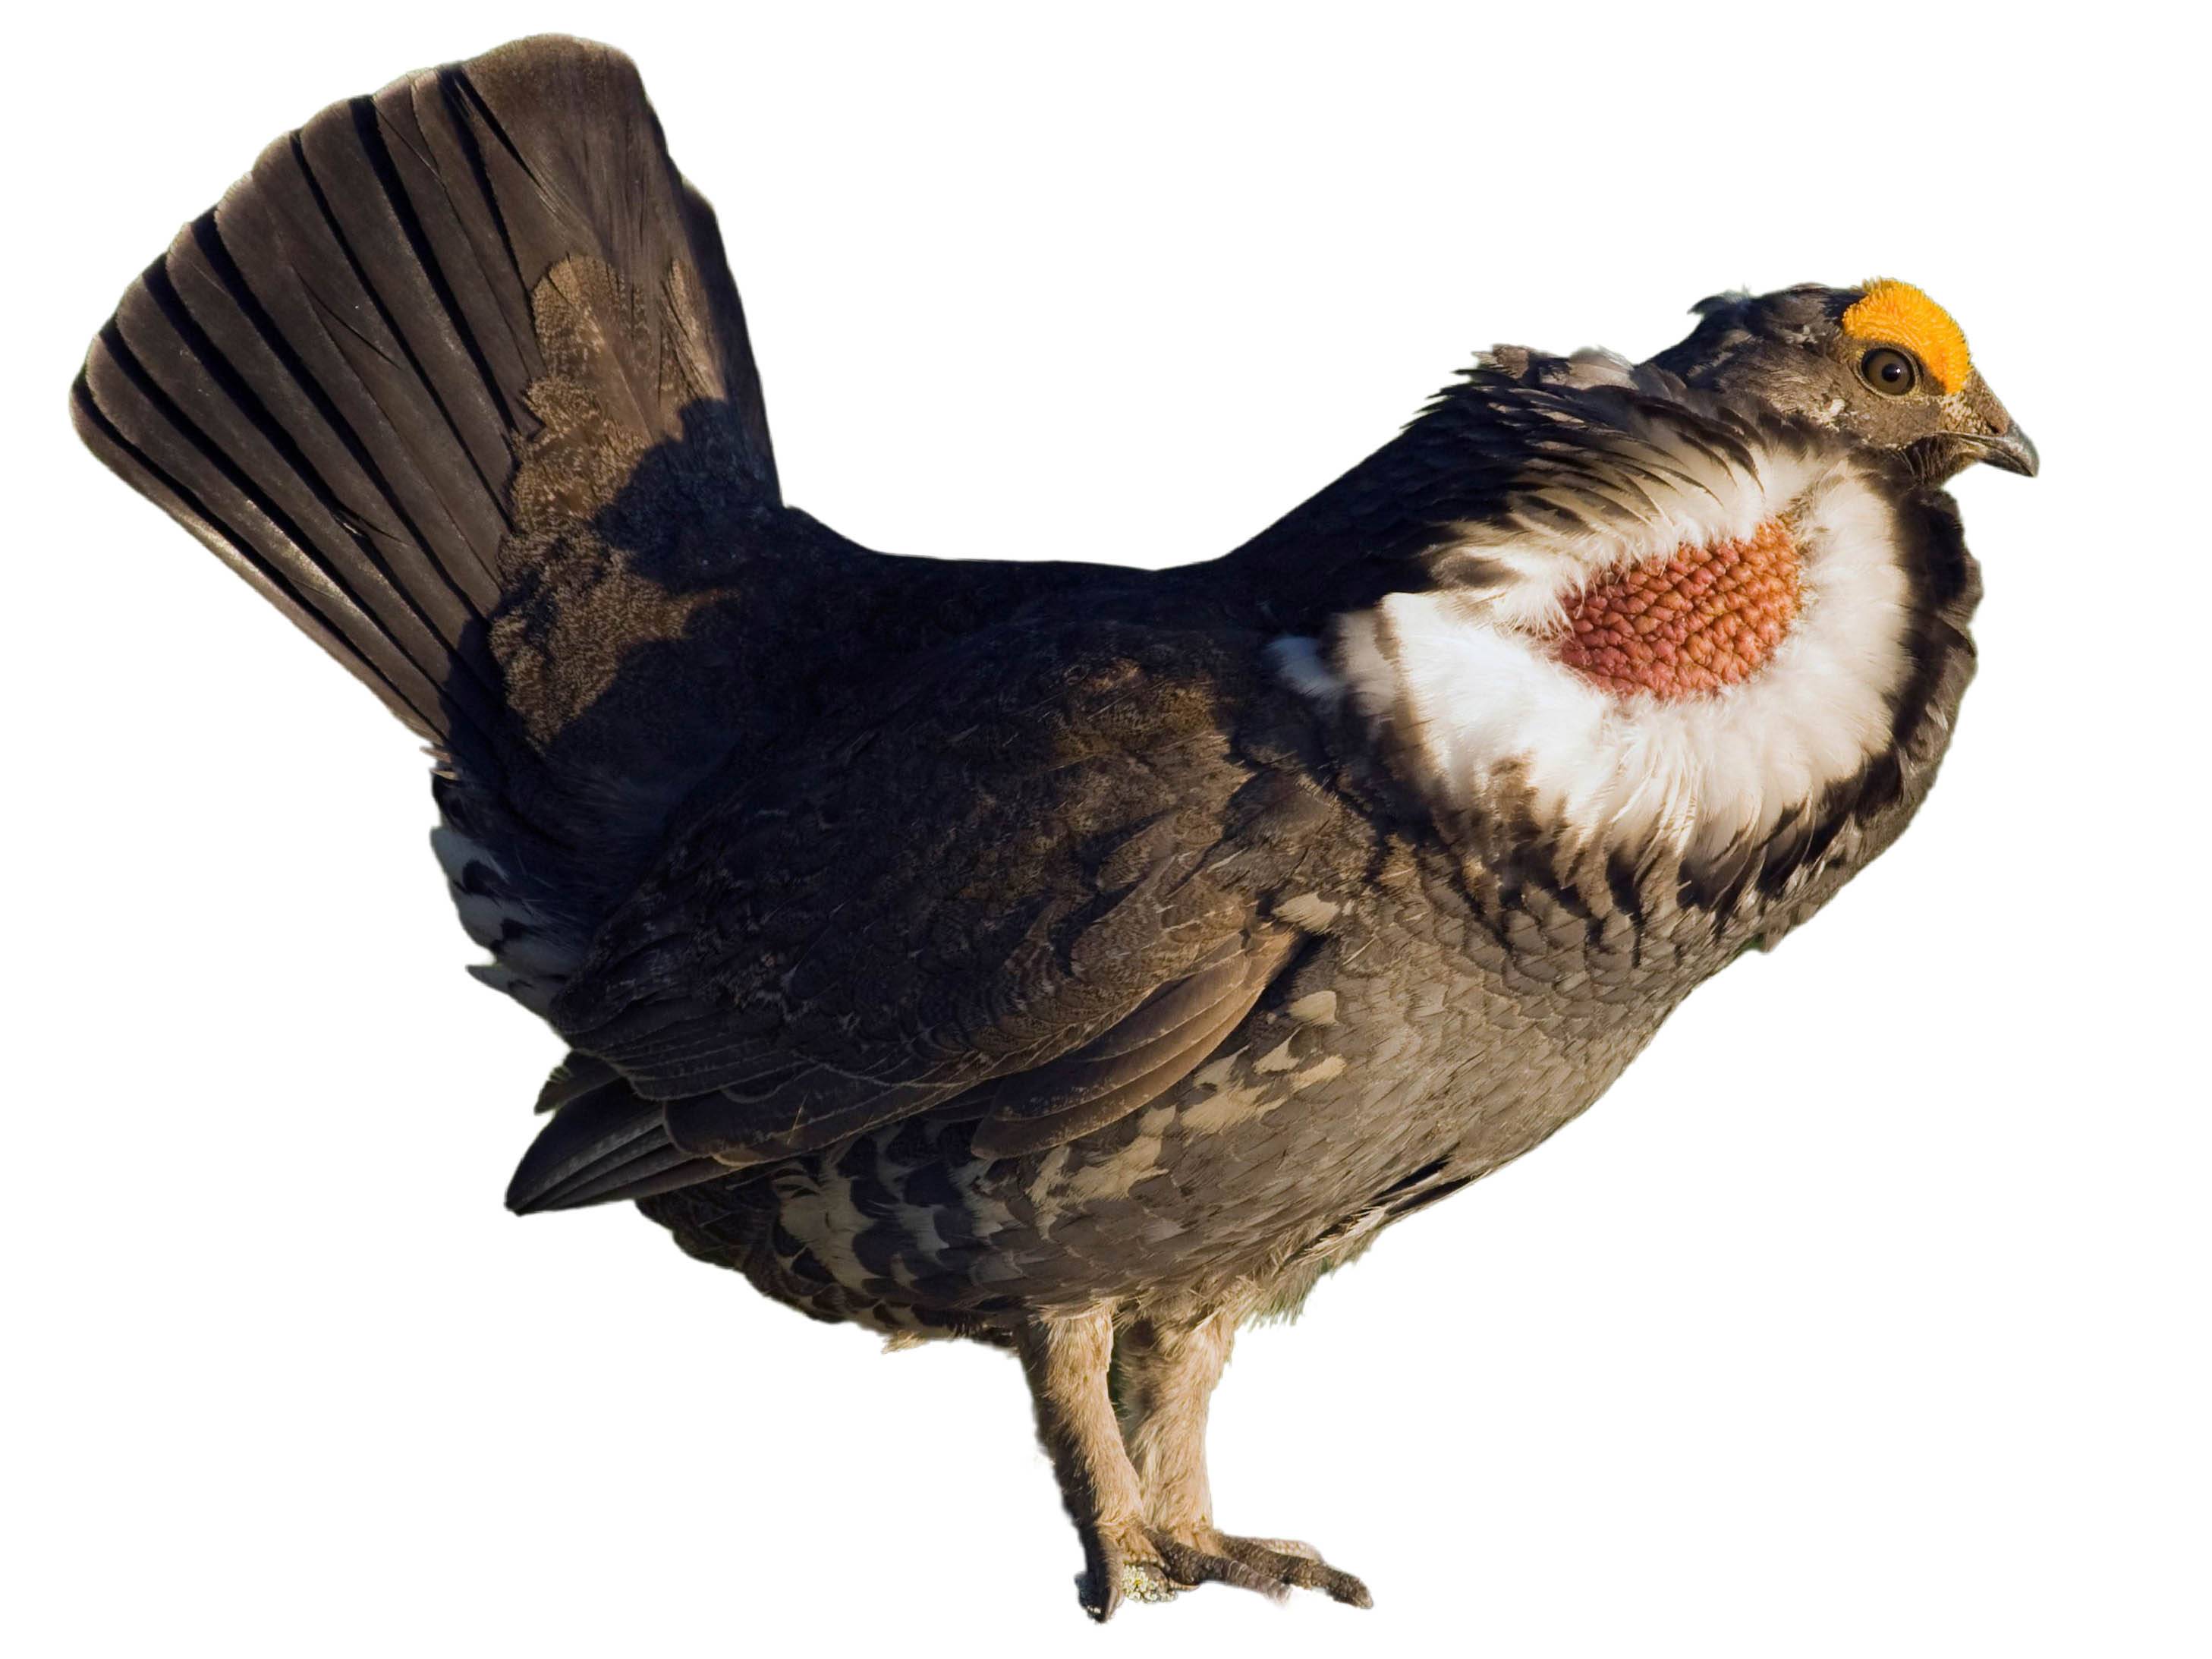 A photo of a Dusky Grouse (Dendragapus obscurus), male